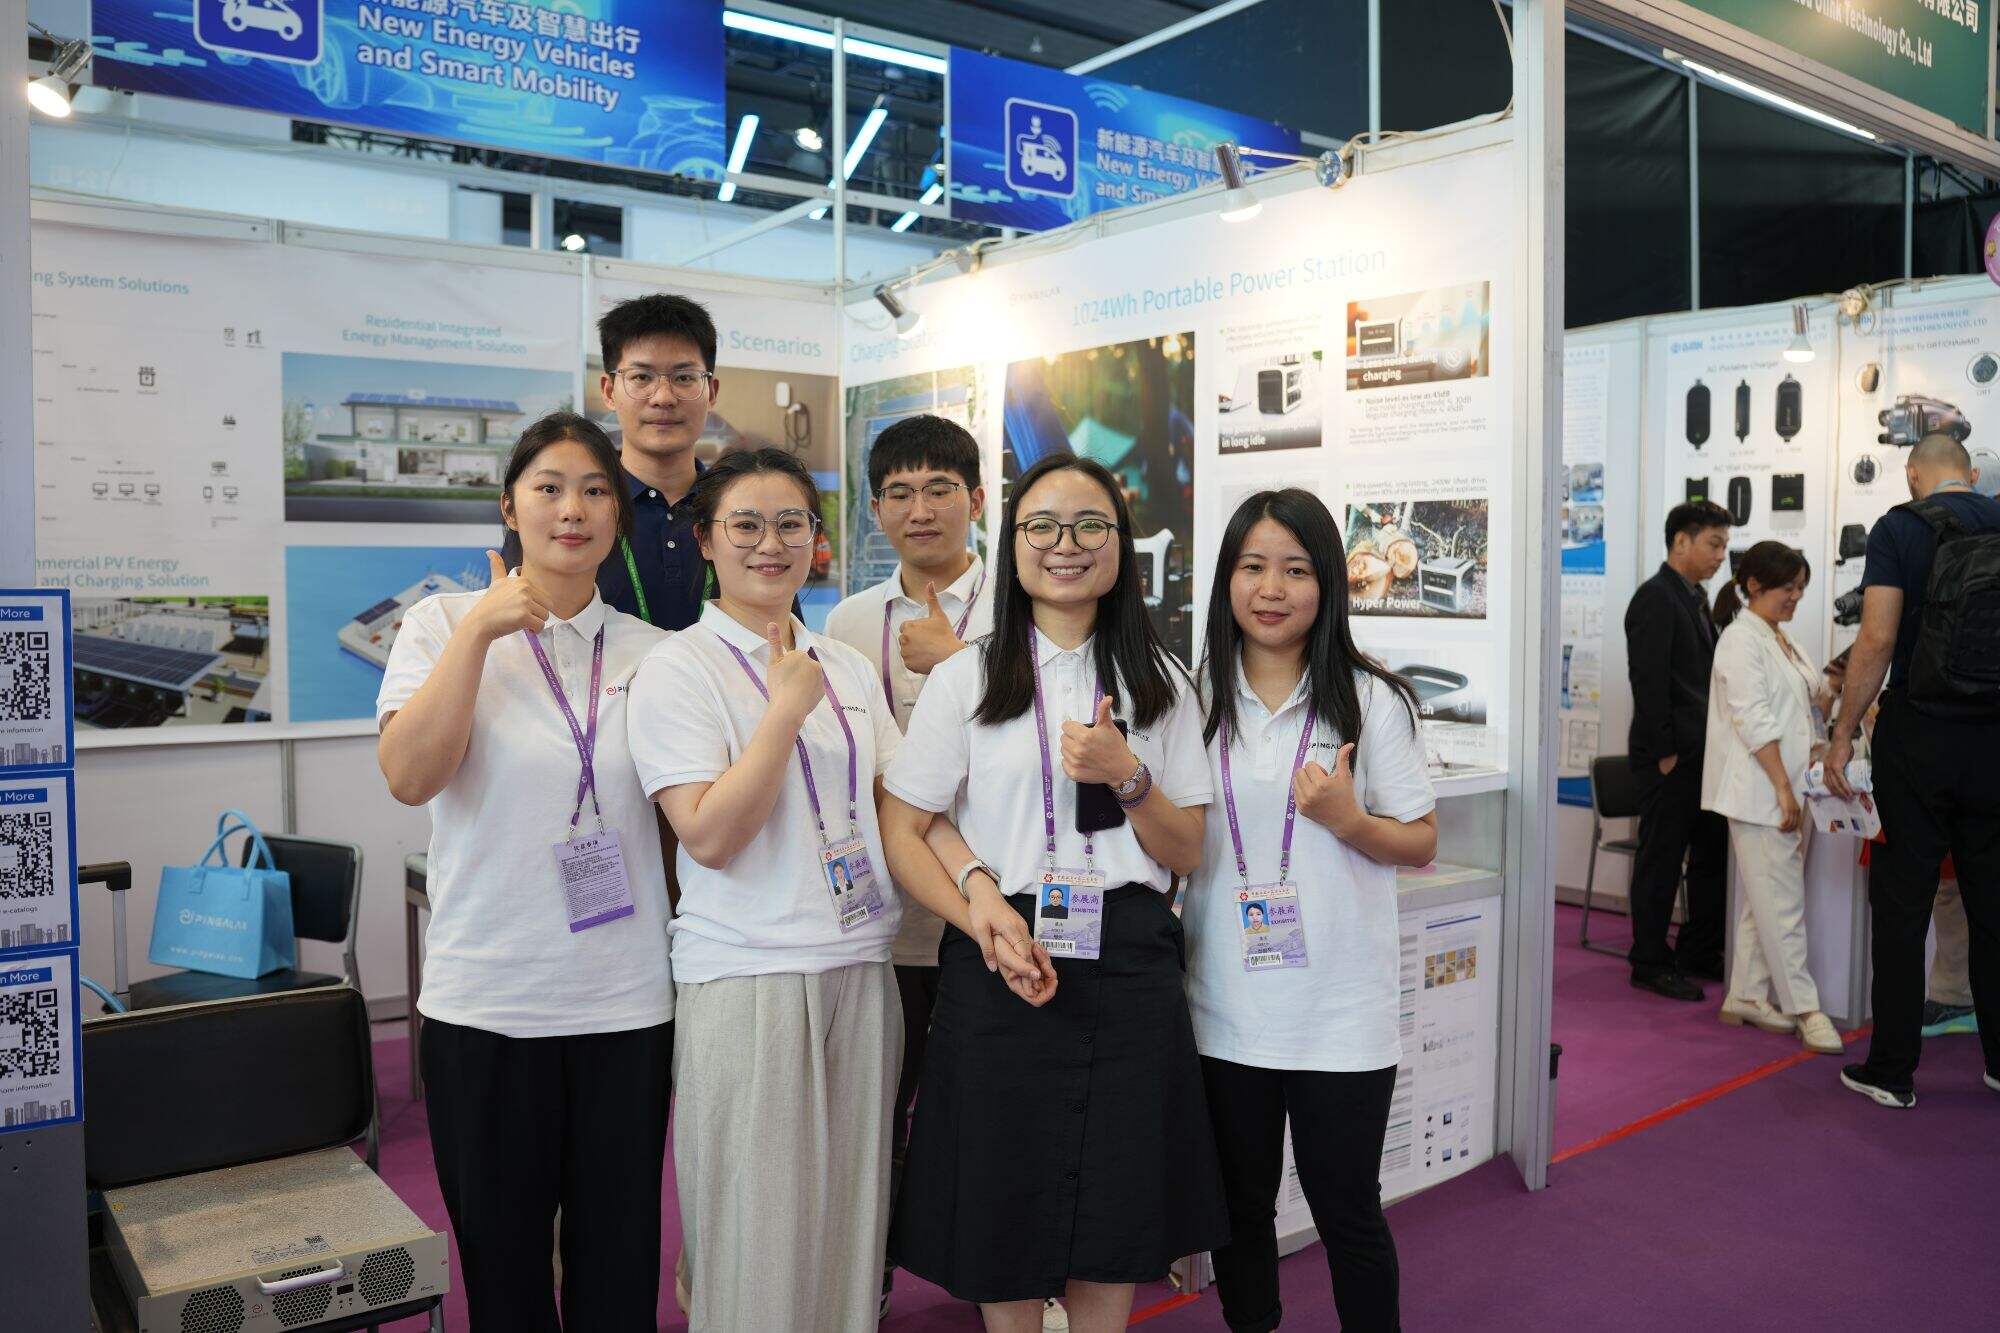 Going Global! Pingchuan Digital Energy Impresses at Canton Fair with Latest Product Launches